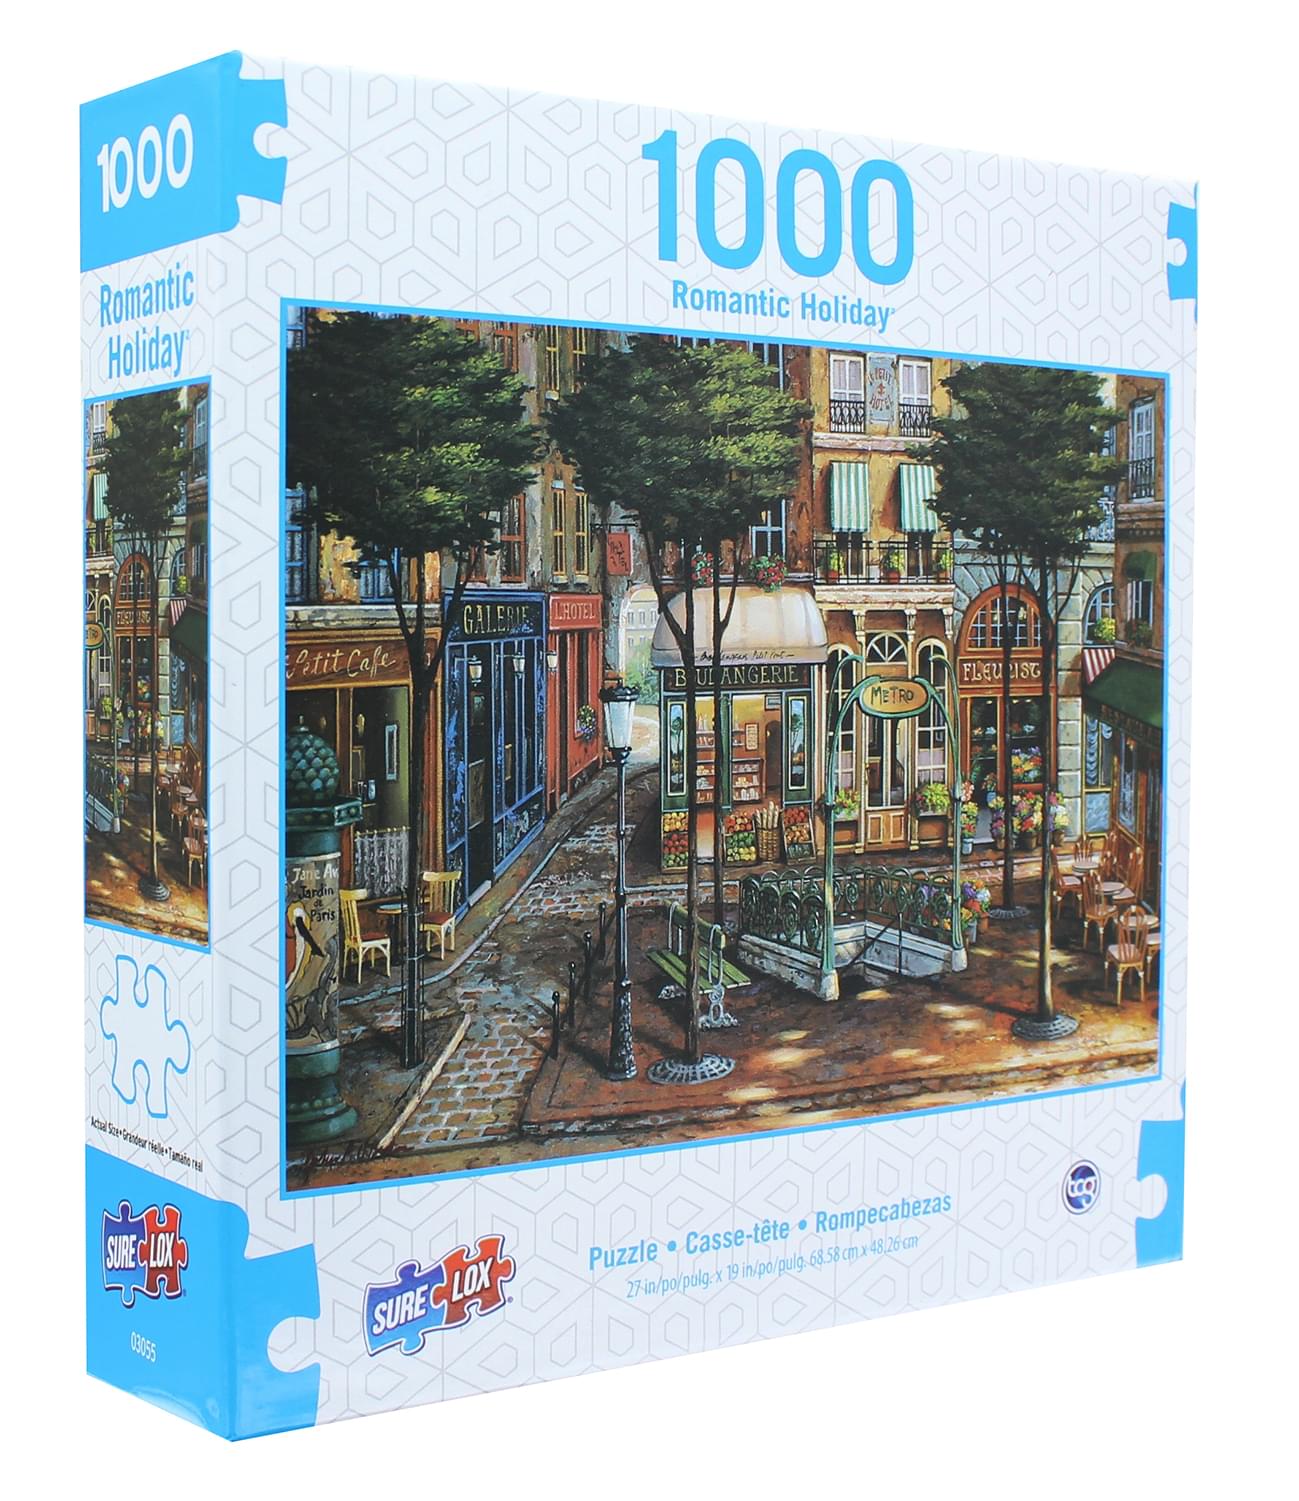 Romantic Holiday 1000 Piece Jigsaw Puzzle | Sunlit Square